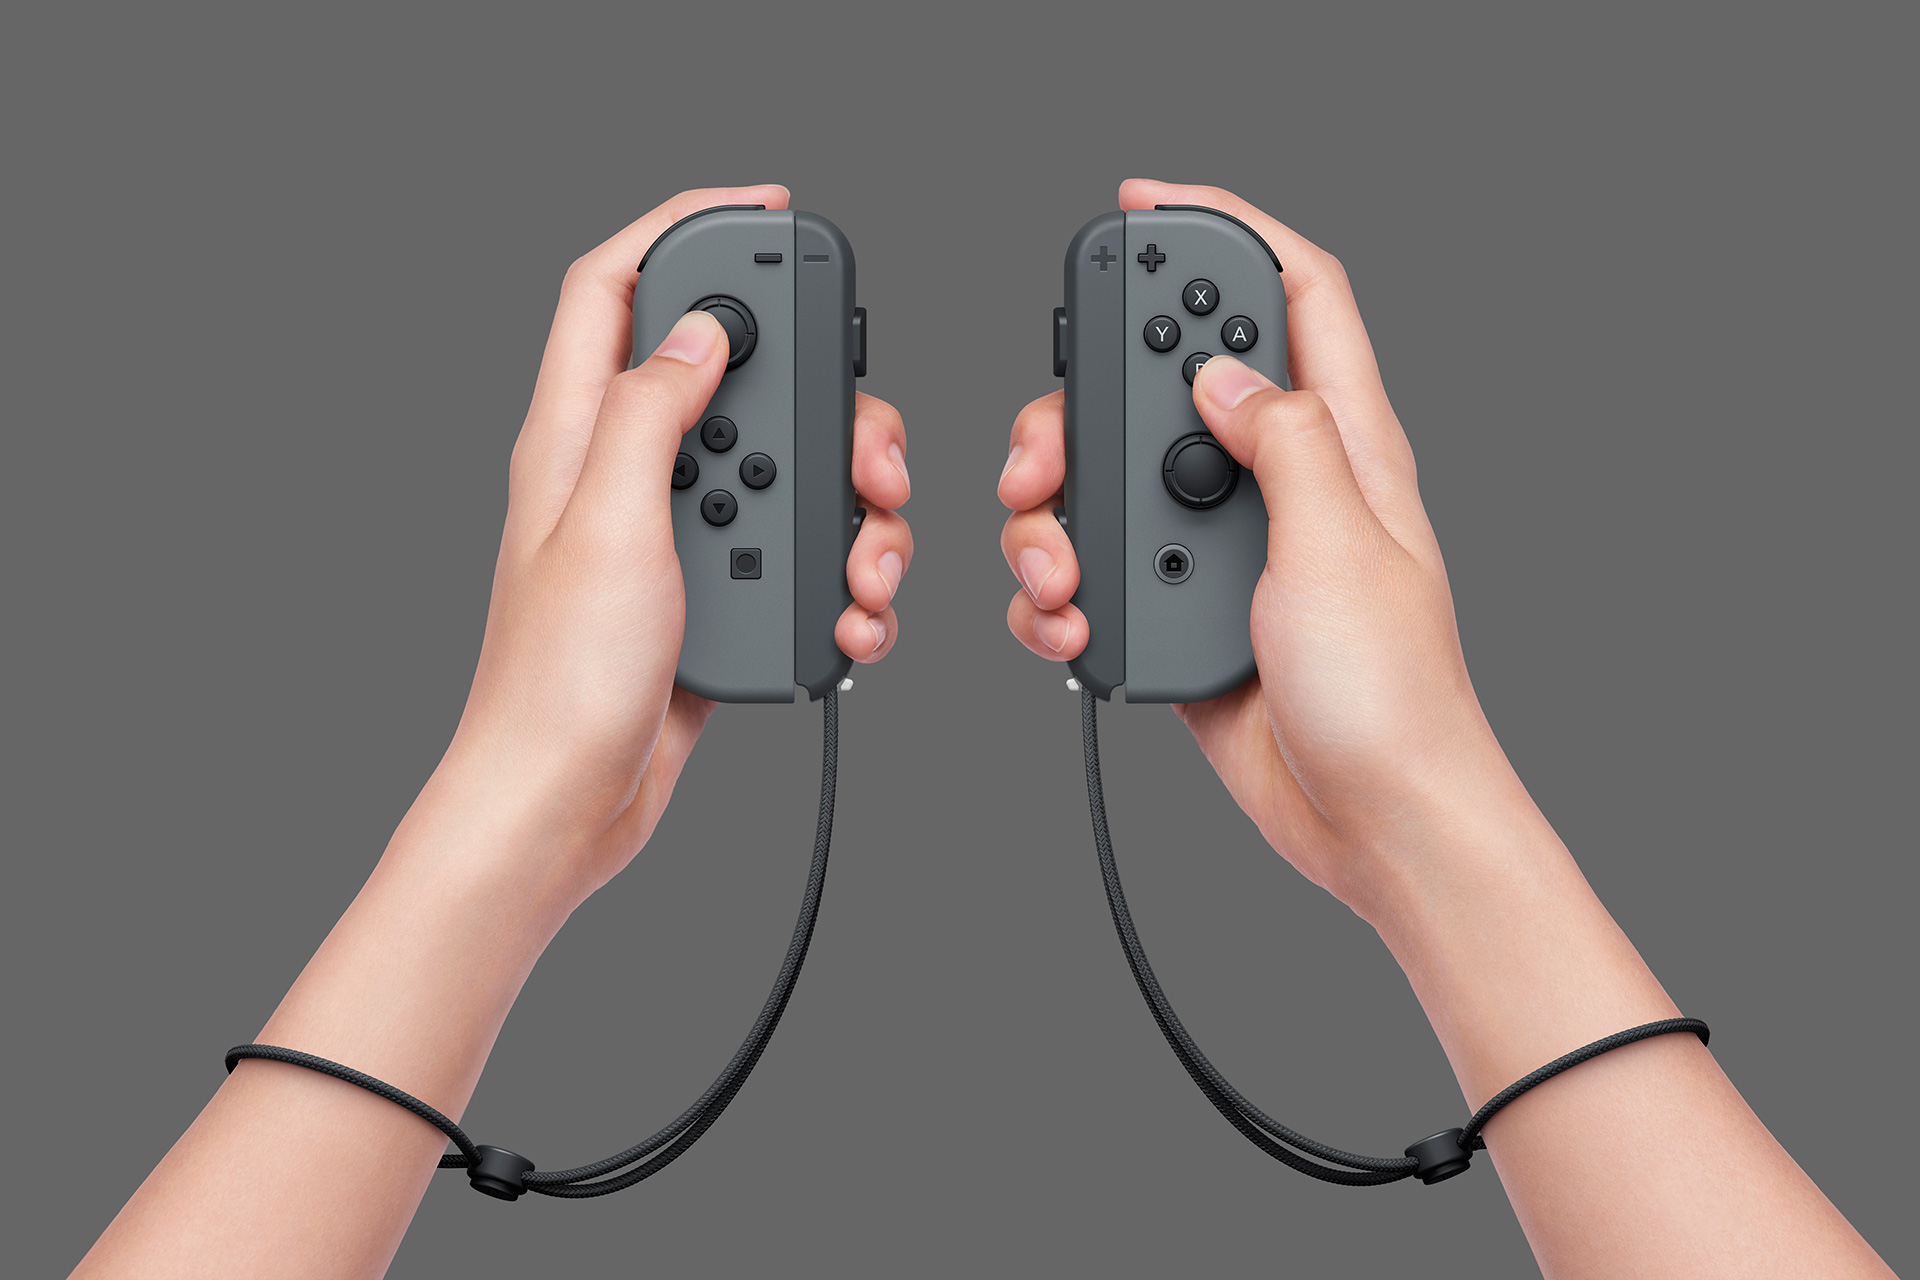 Joy-con issues with wrist straps